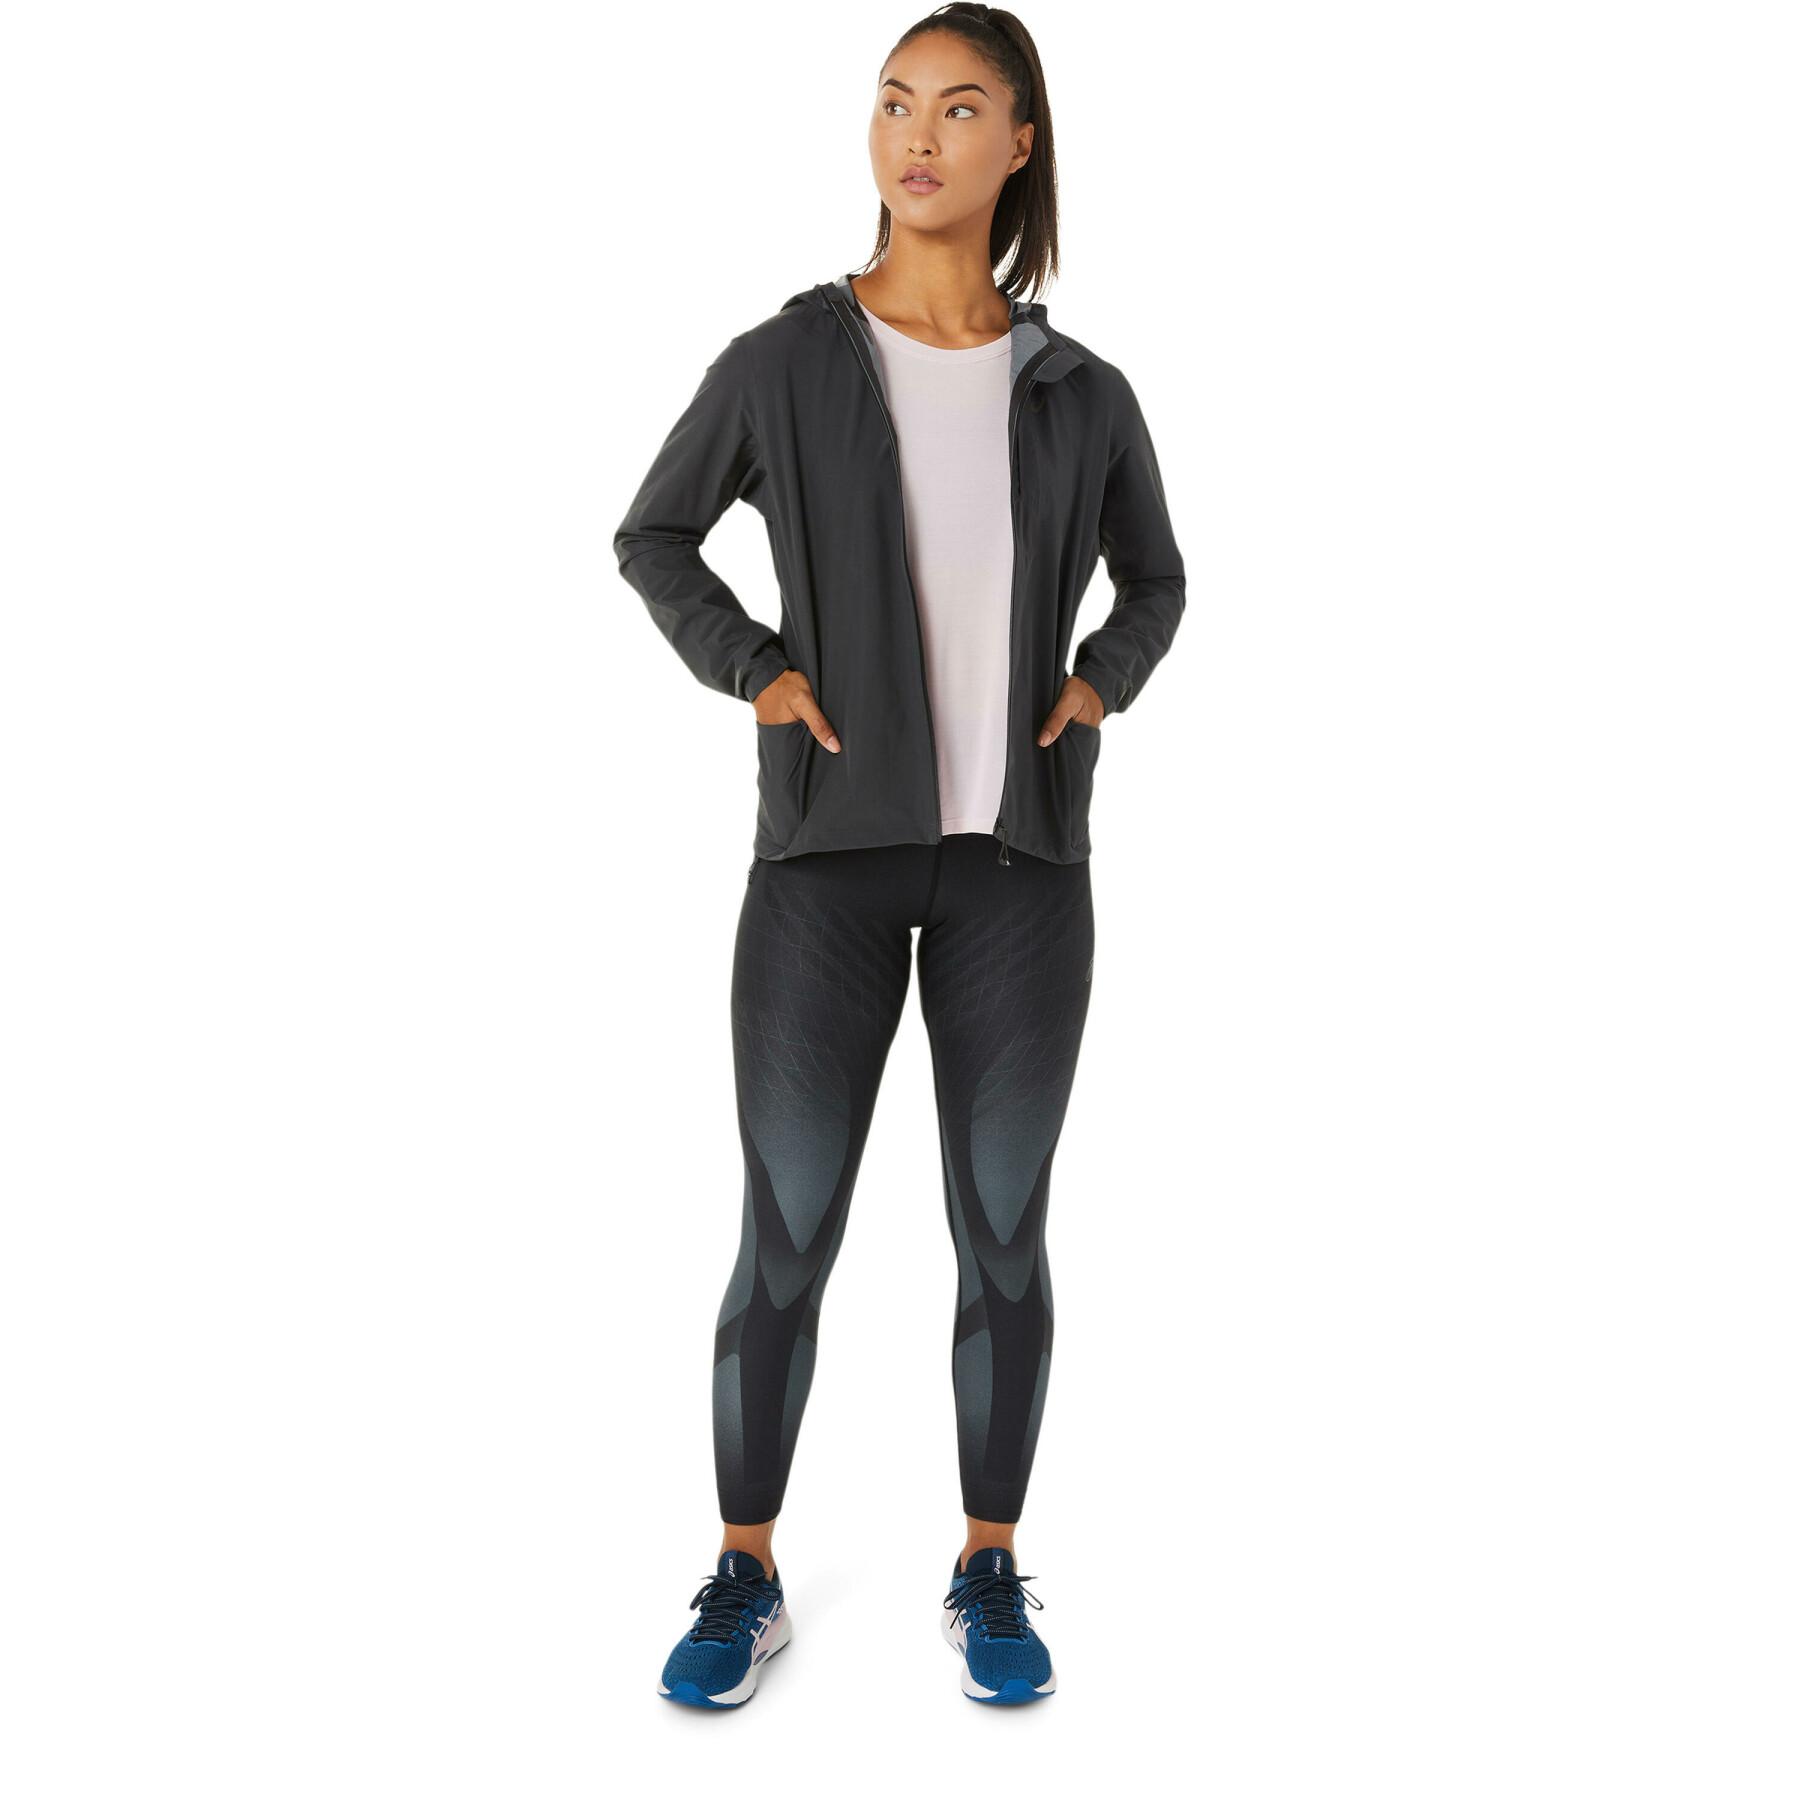 Chaqueta impermeable para mujer Asics Accelerate 2.0